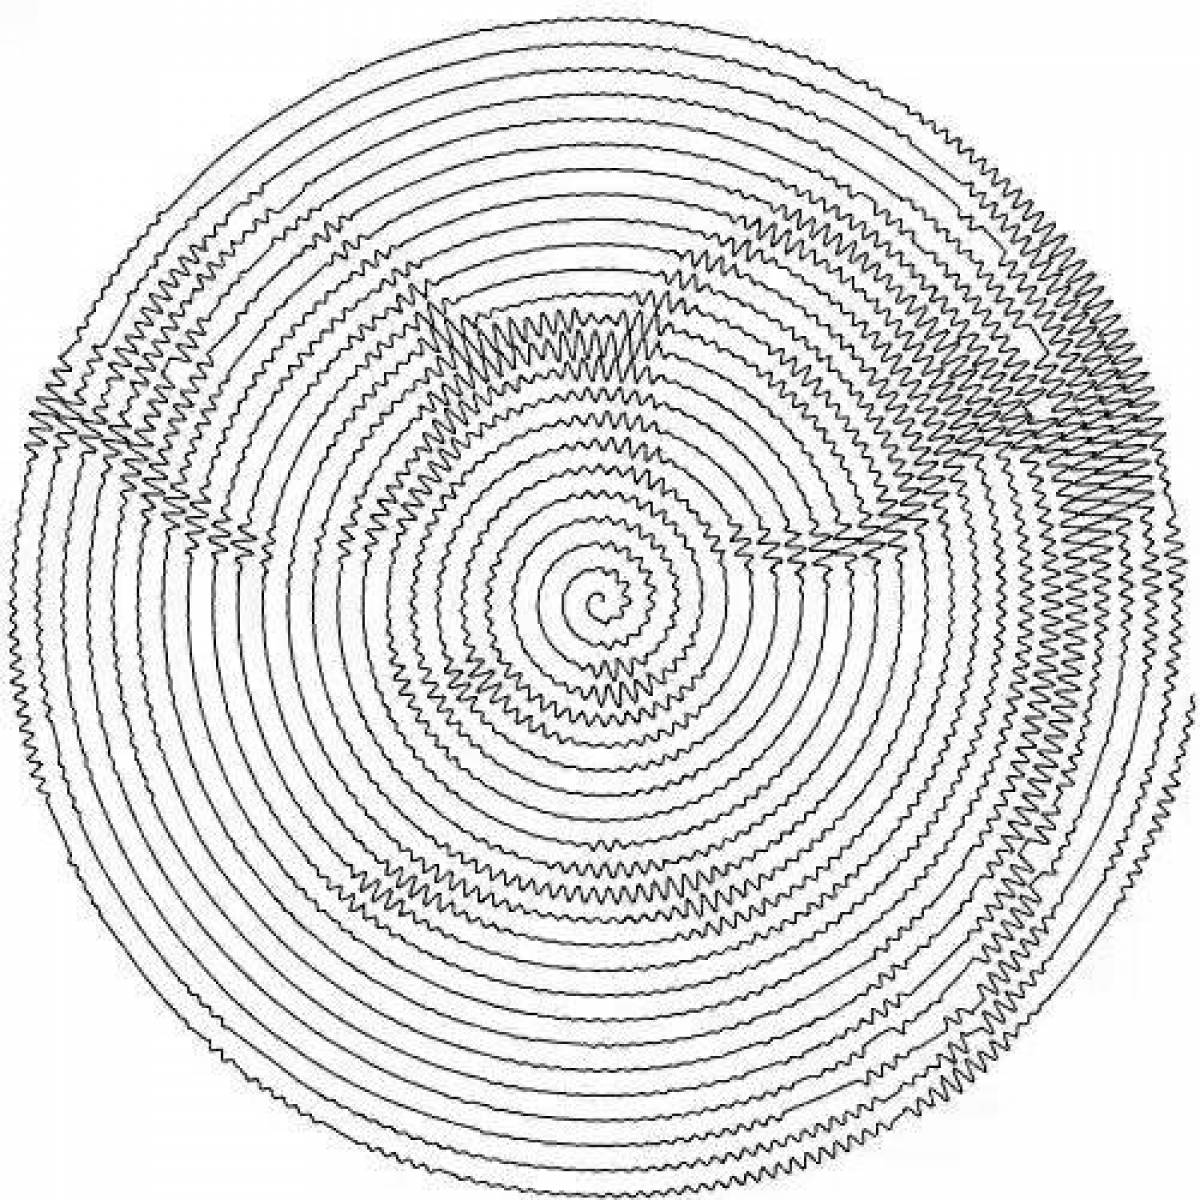 Luminous coloring in a circle in a spiral